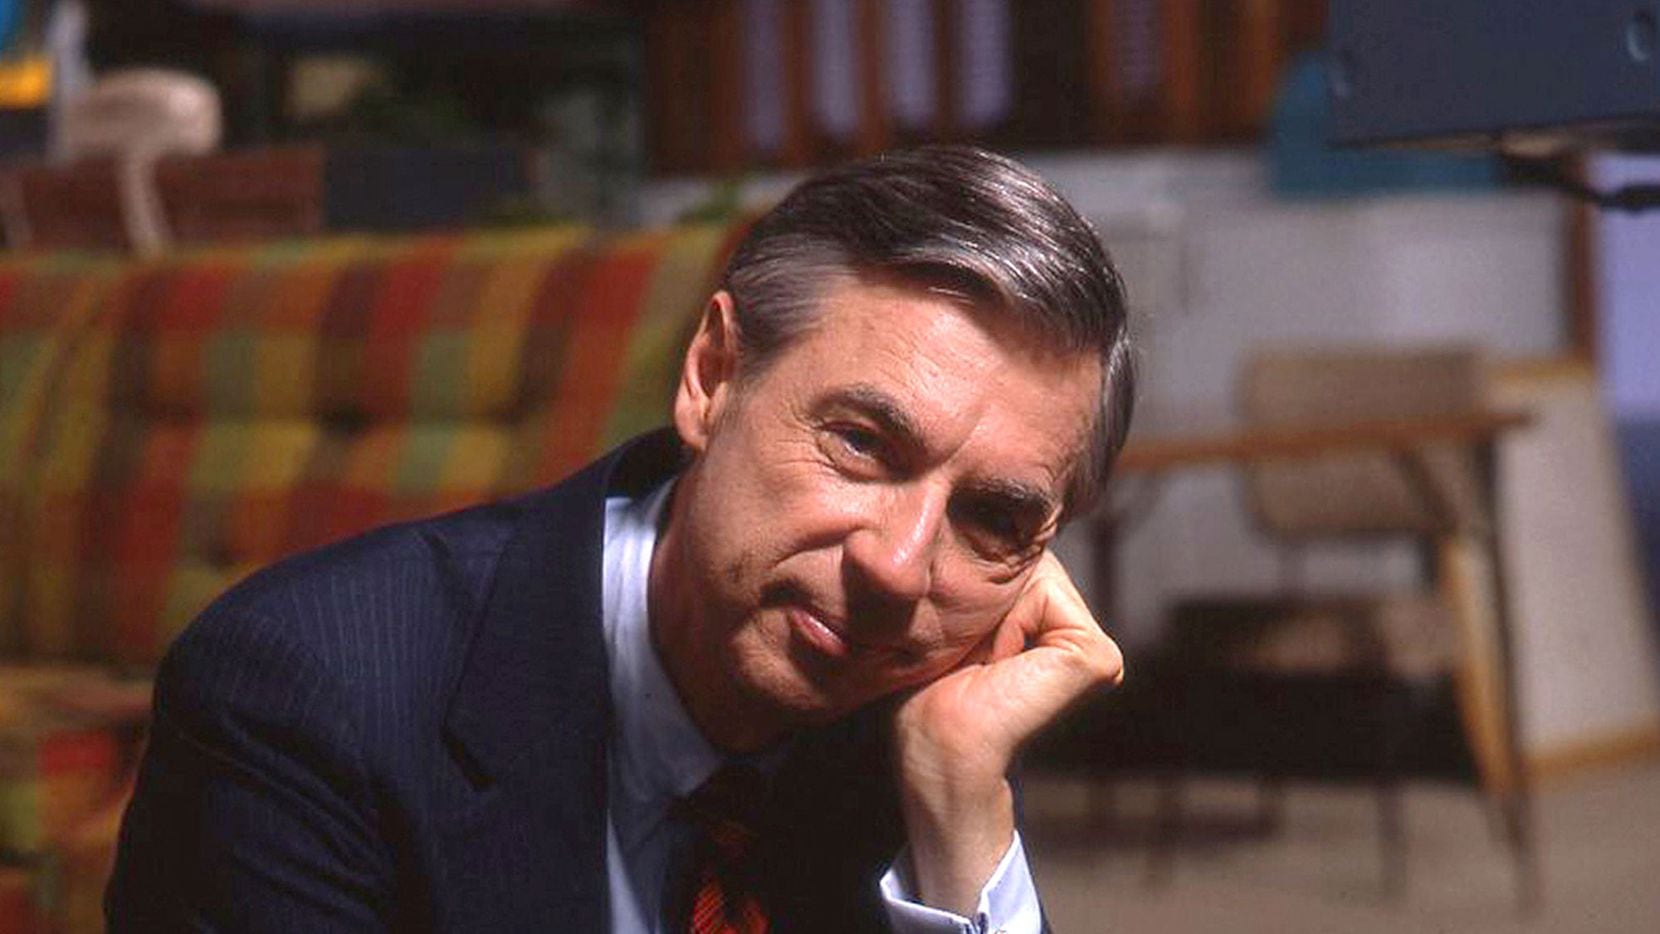 Fred Rogers on the set of his show "Mr. Rogers Neighborhood," from the film "Won't You Be My...